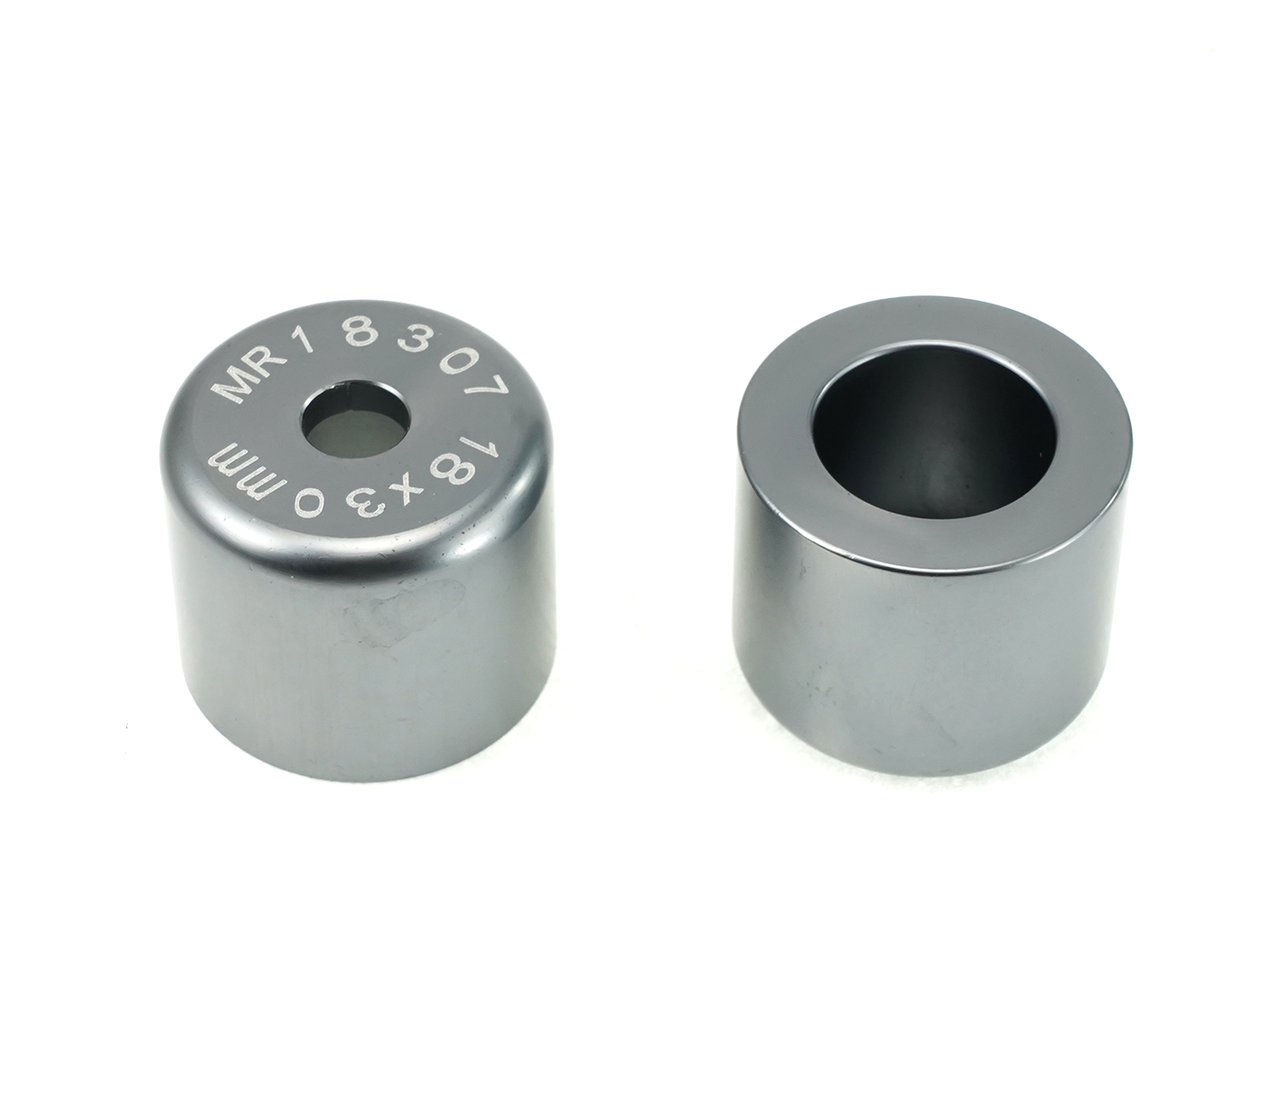 Enduro HT MR 18307 Outer - Outer Bearing Guide for Bearing Press (BRT-005 or BRT-050) - single guide only